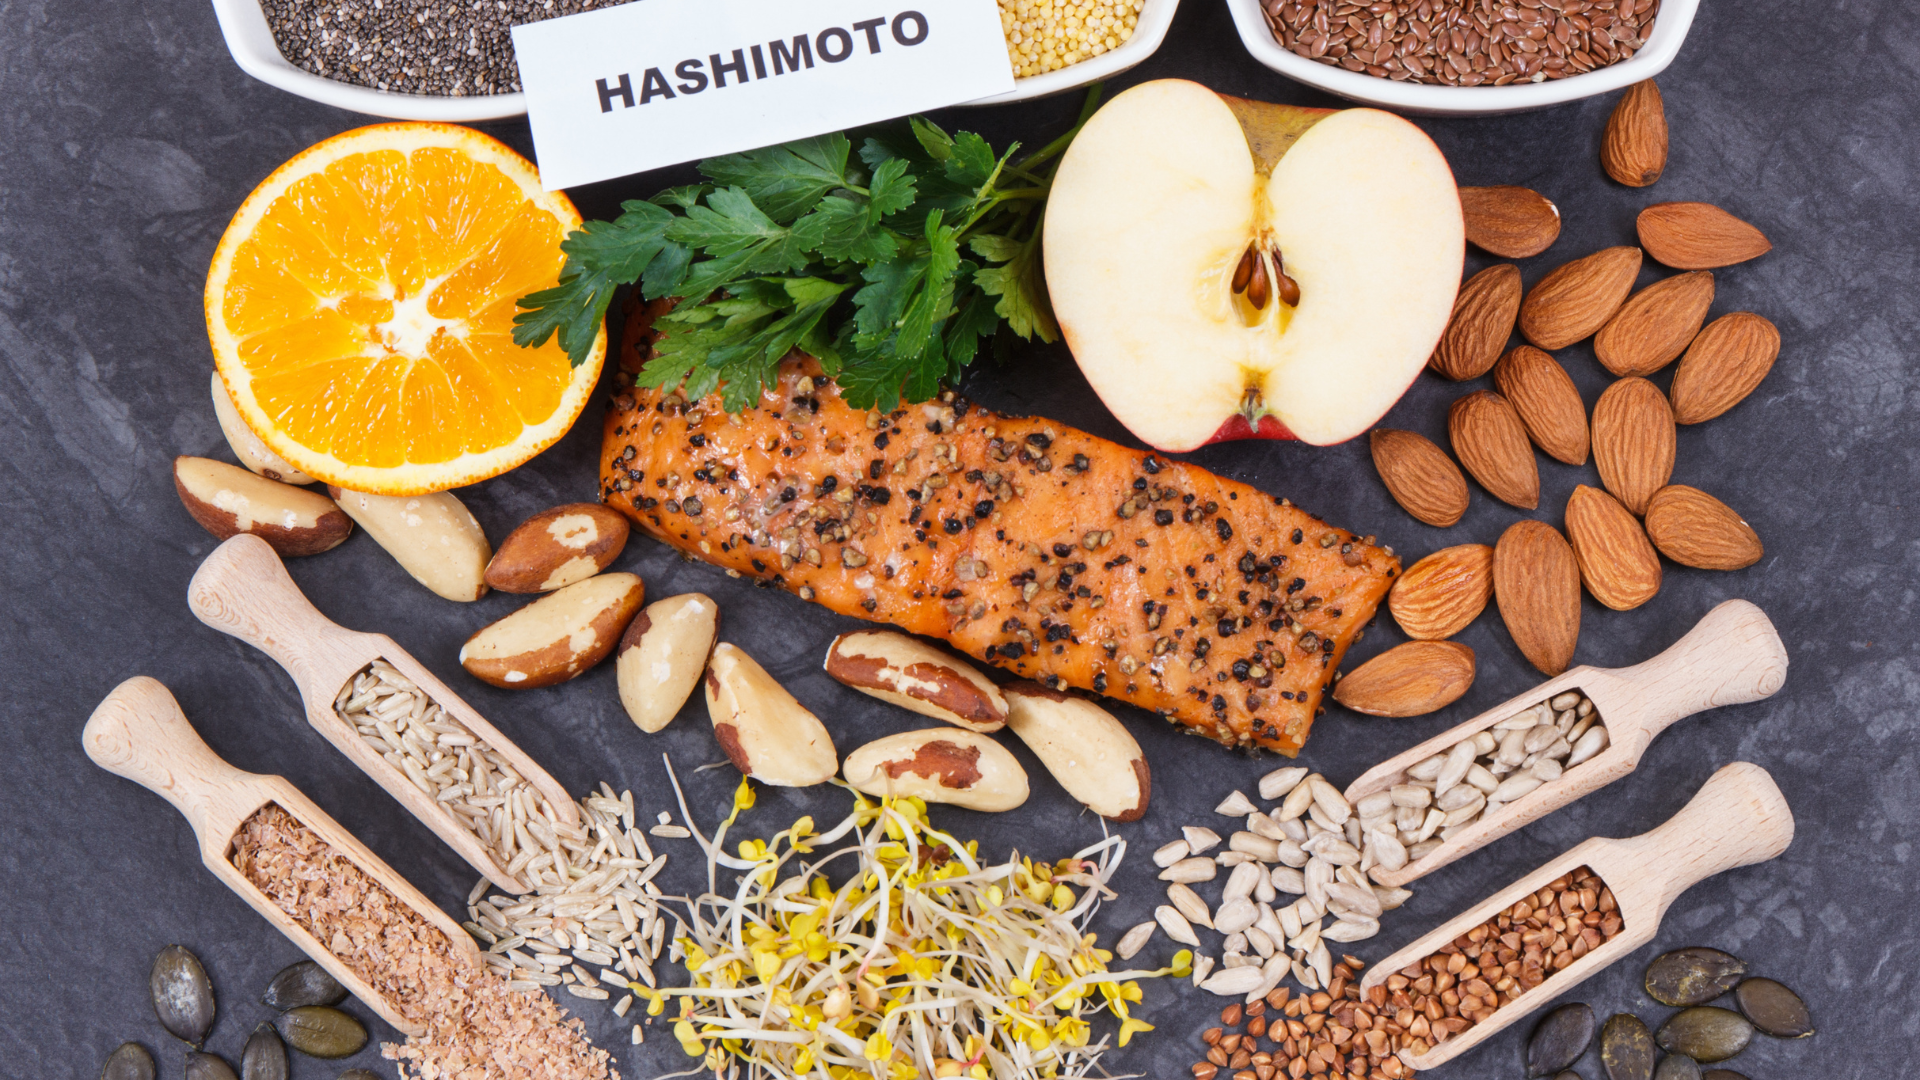 hashimoto catering